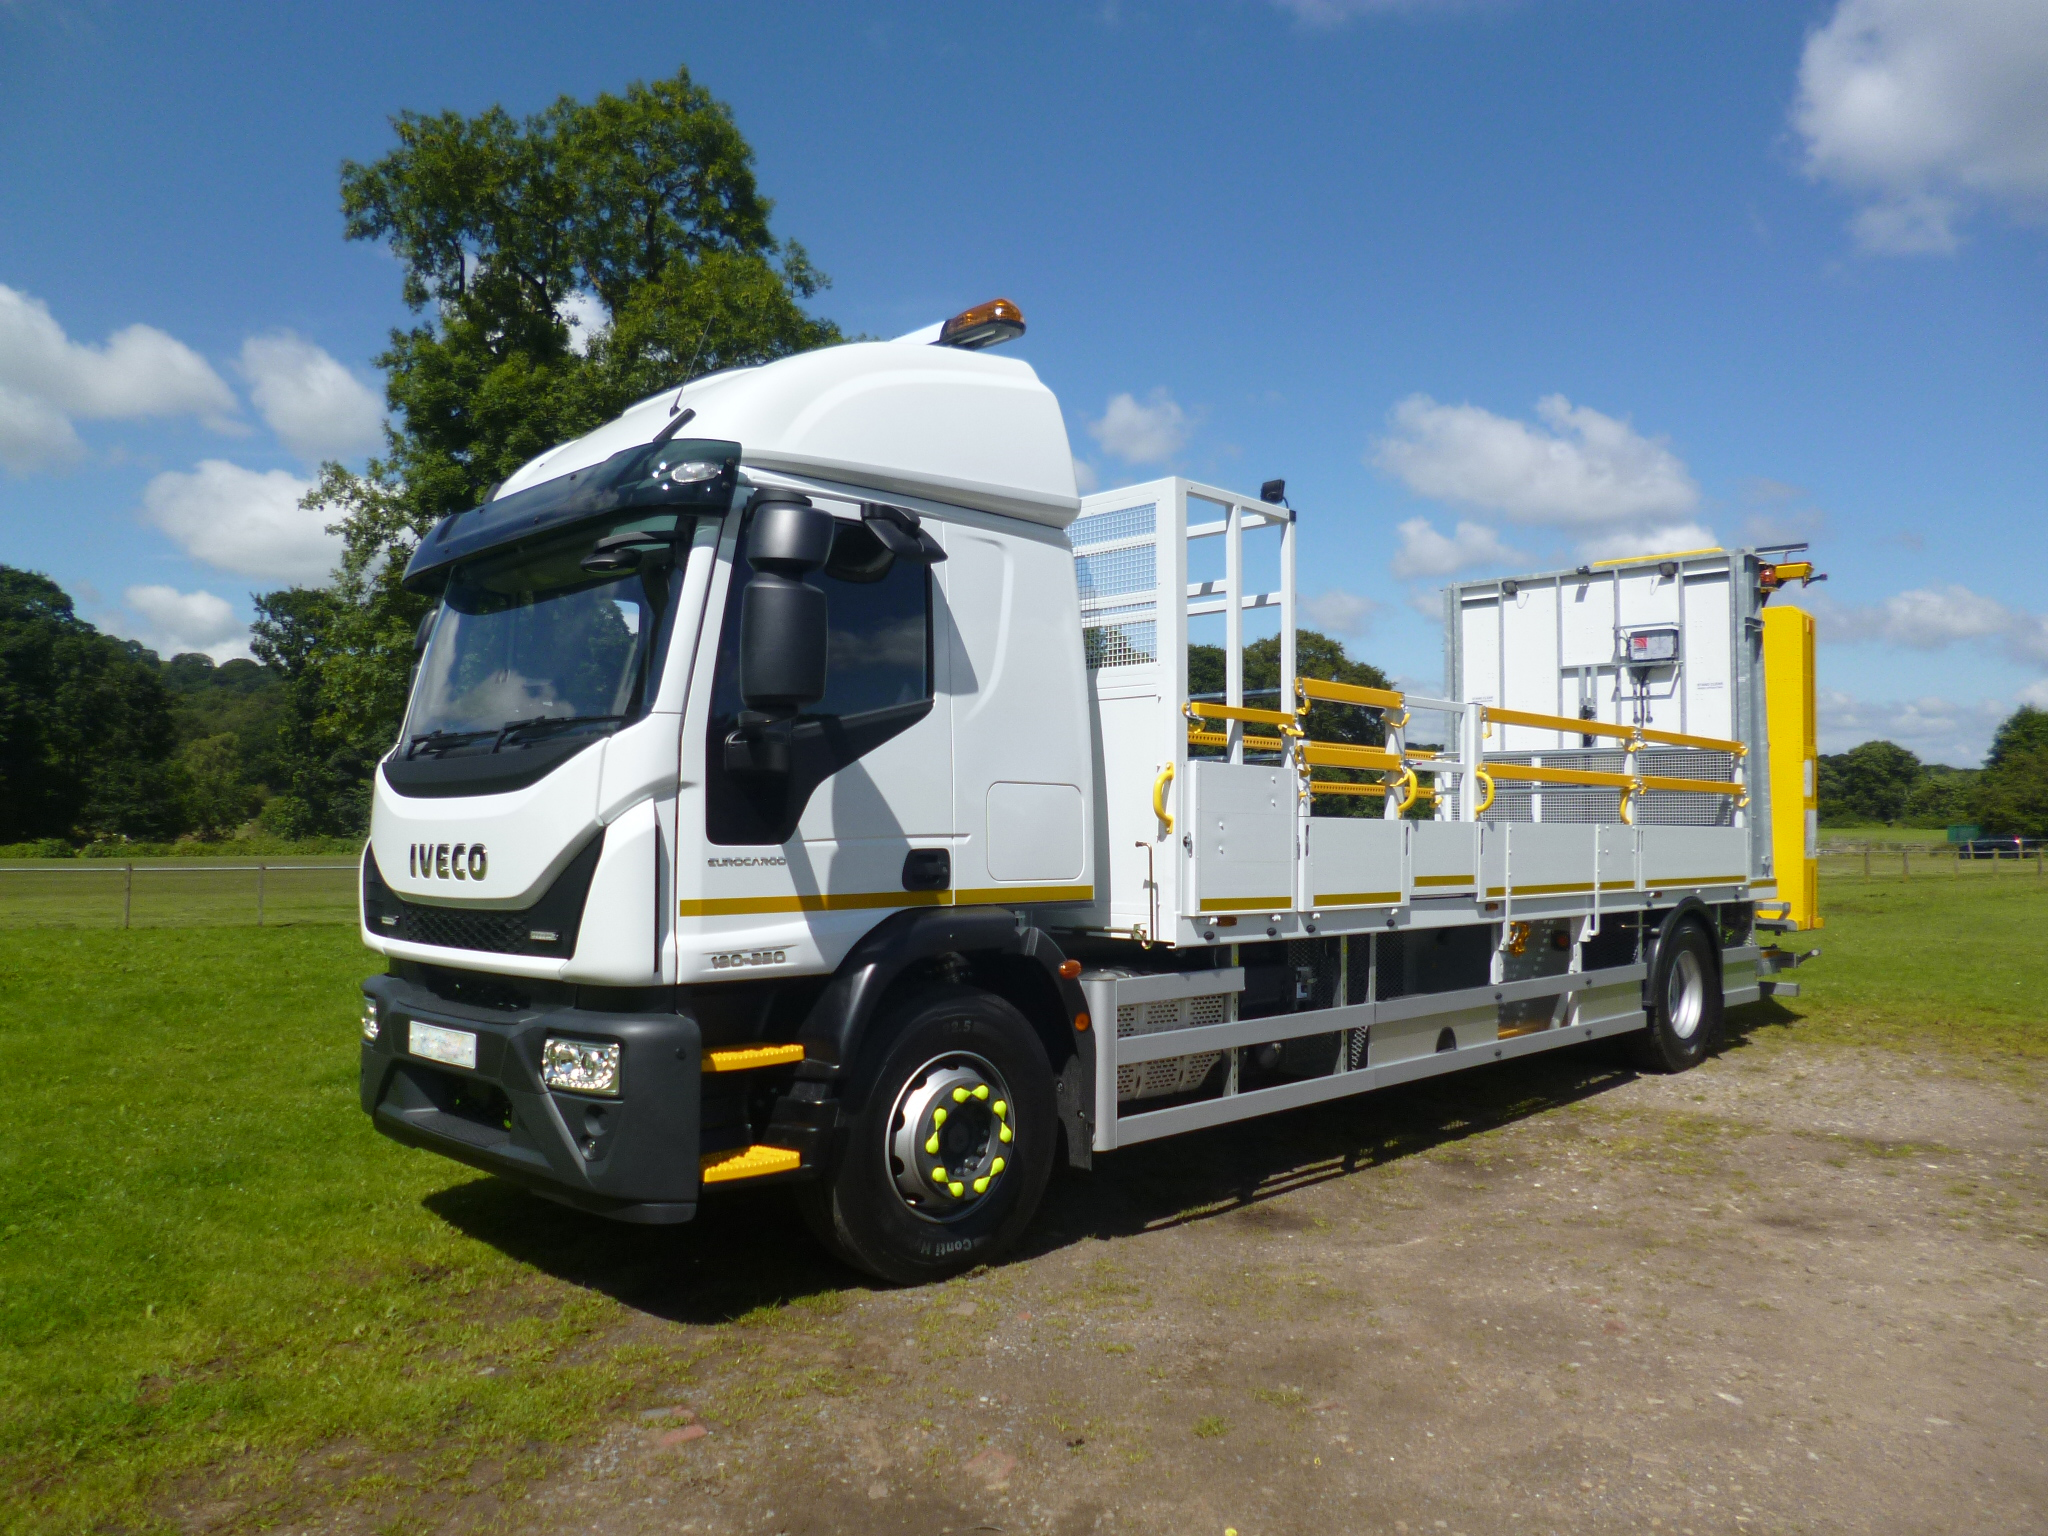 Blakedale heads to Road Expo Scotland 